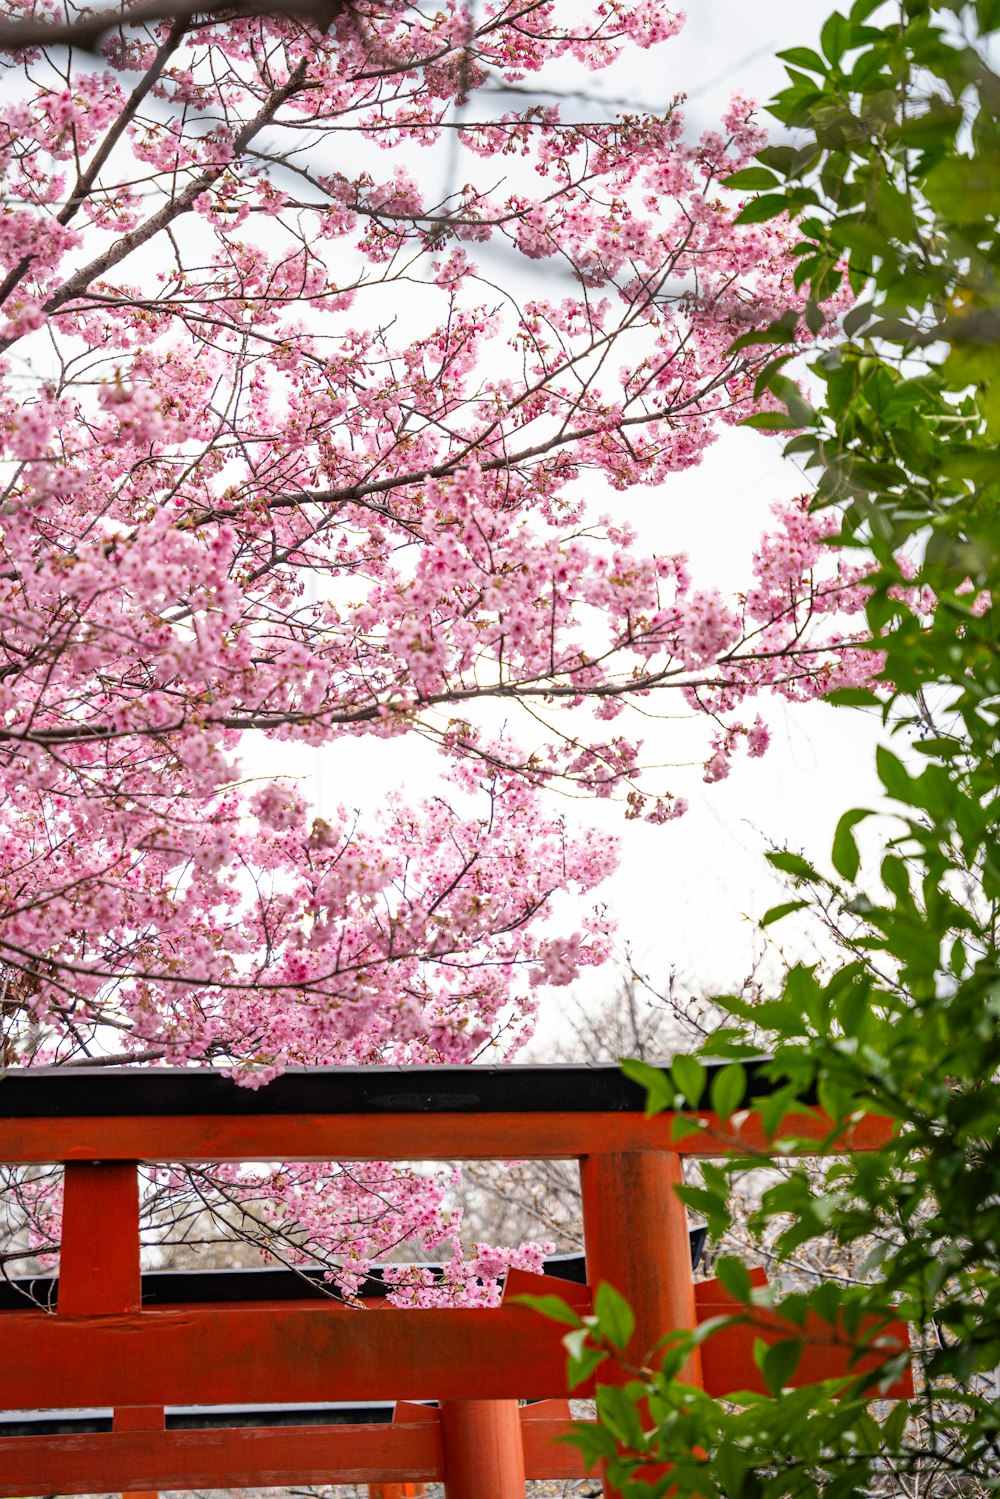 a red bench sitting under a tree with pink flowers